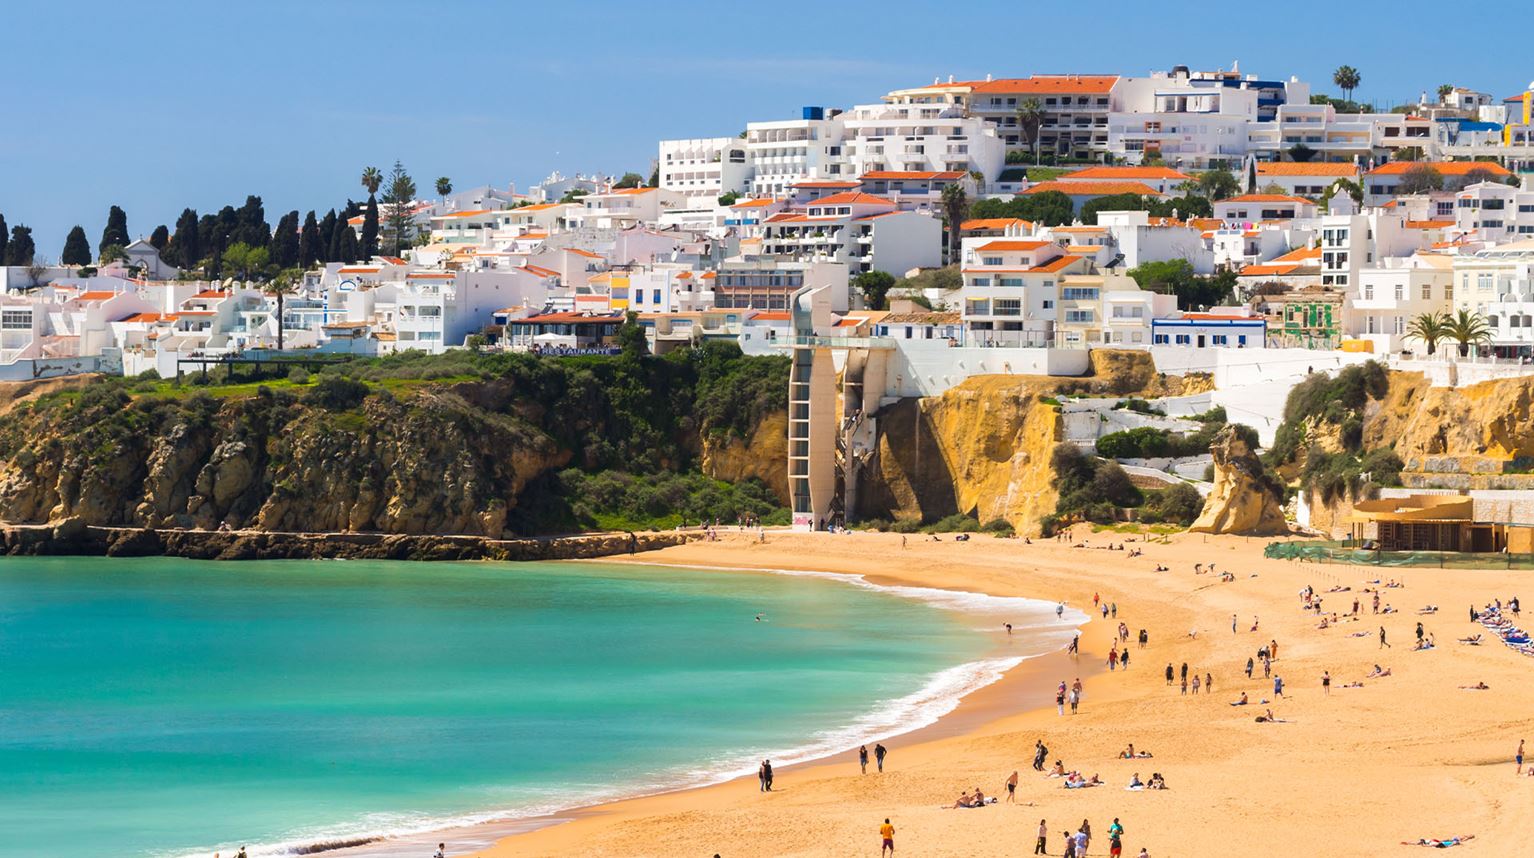 Aeriel view of Albufeira Beach in Algarve, Portugal showing turquoise water with people on the beach